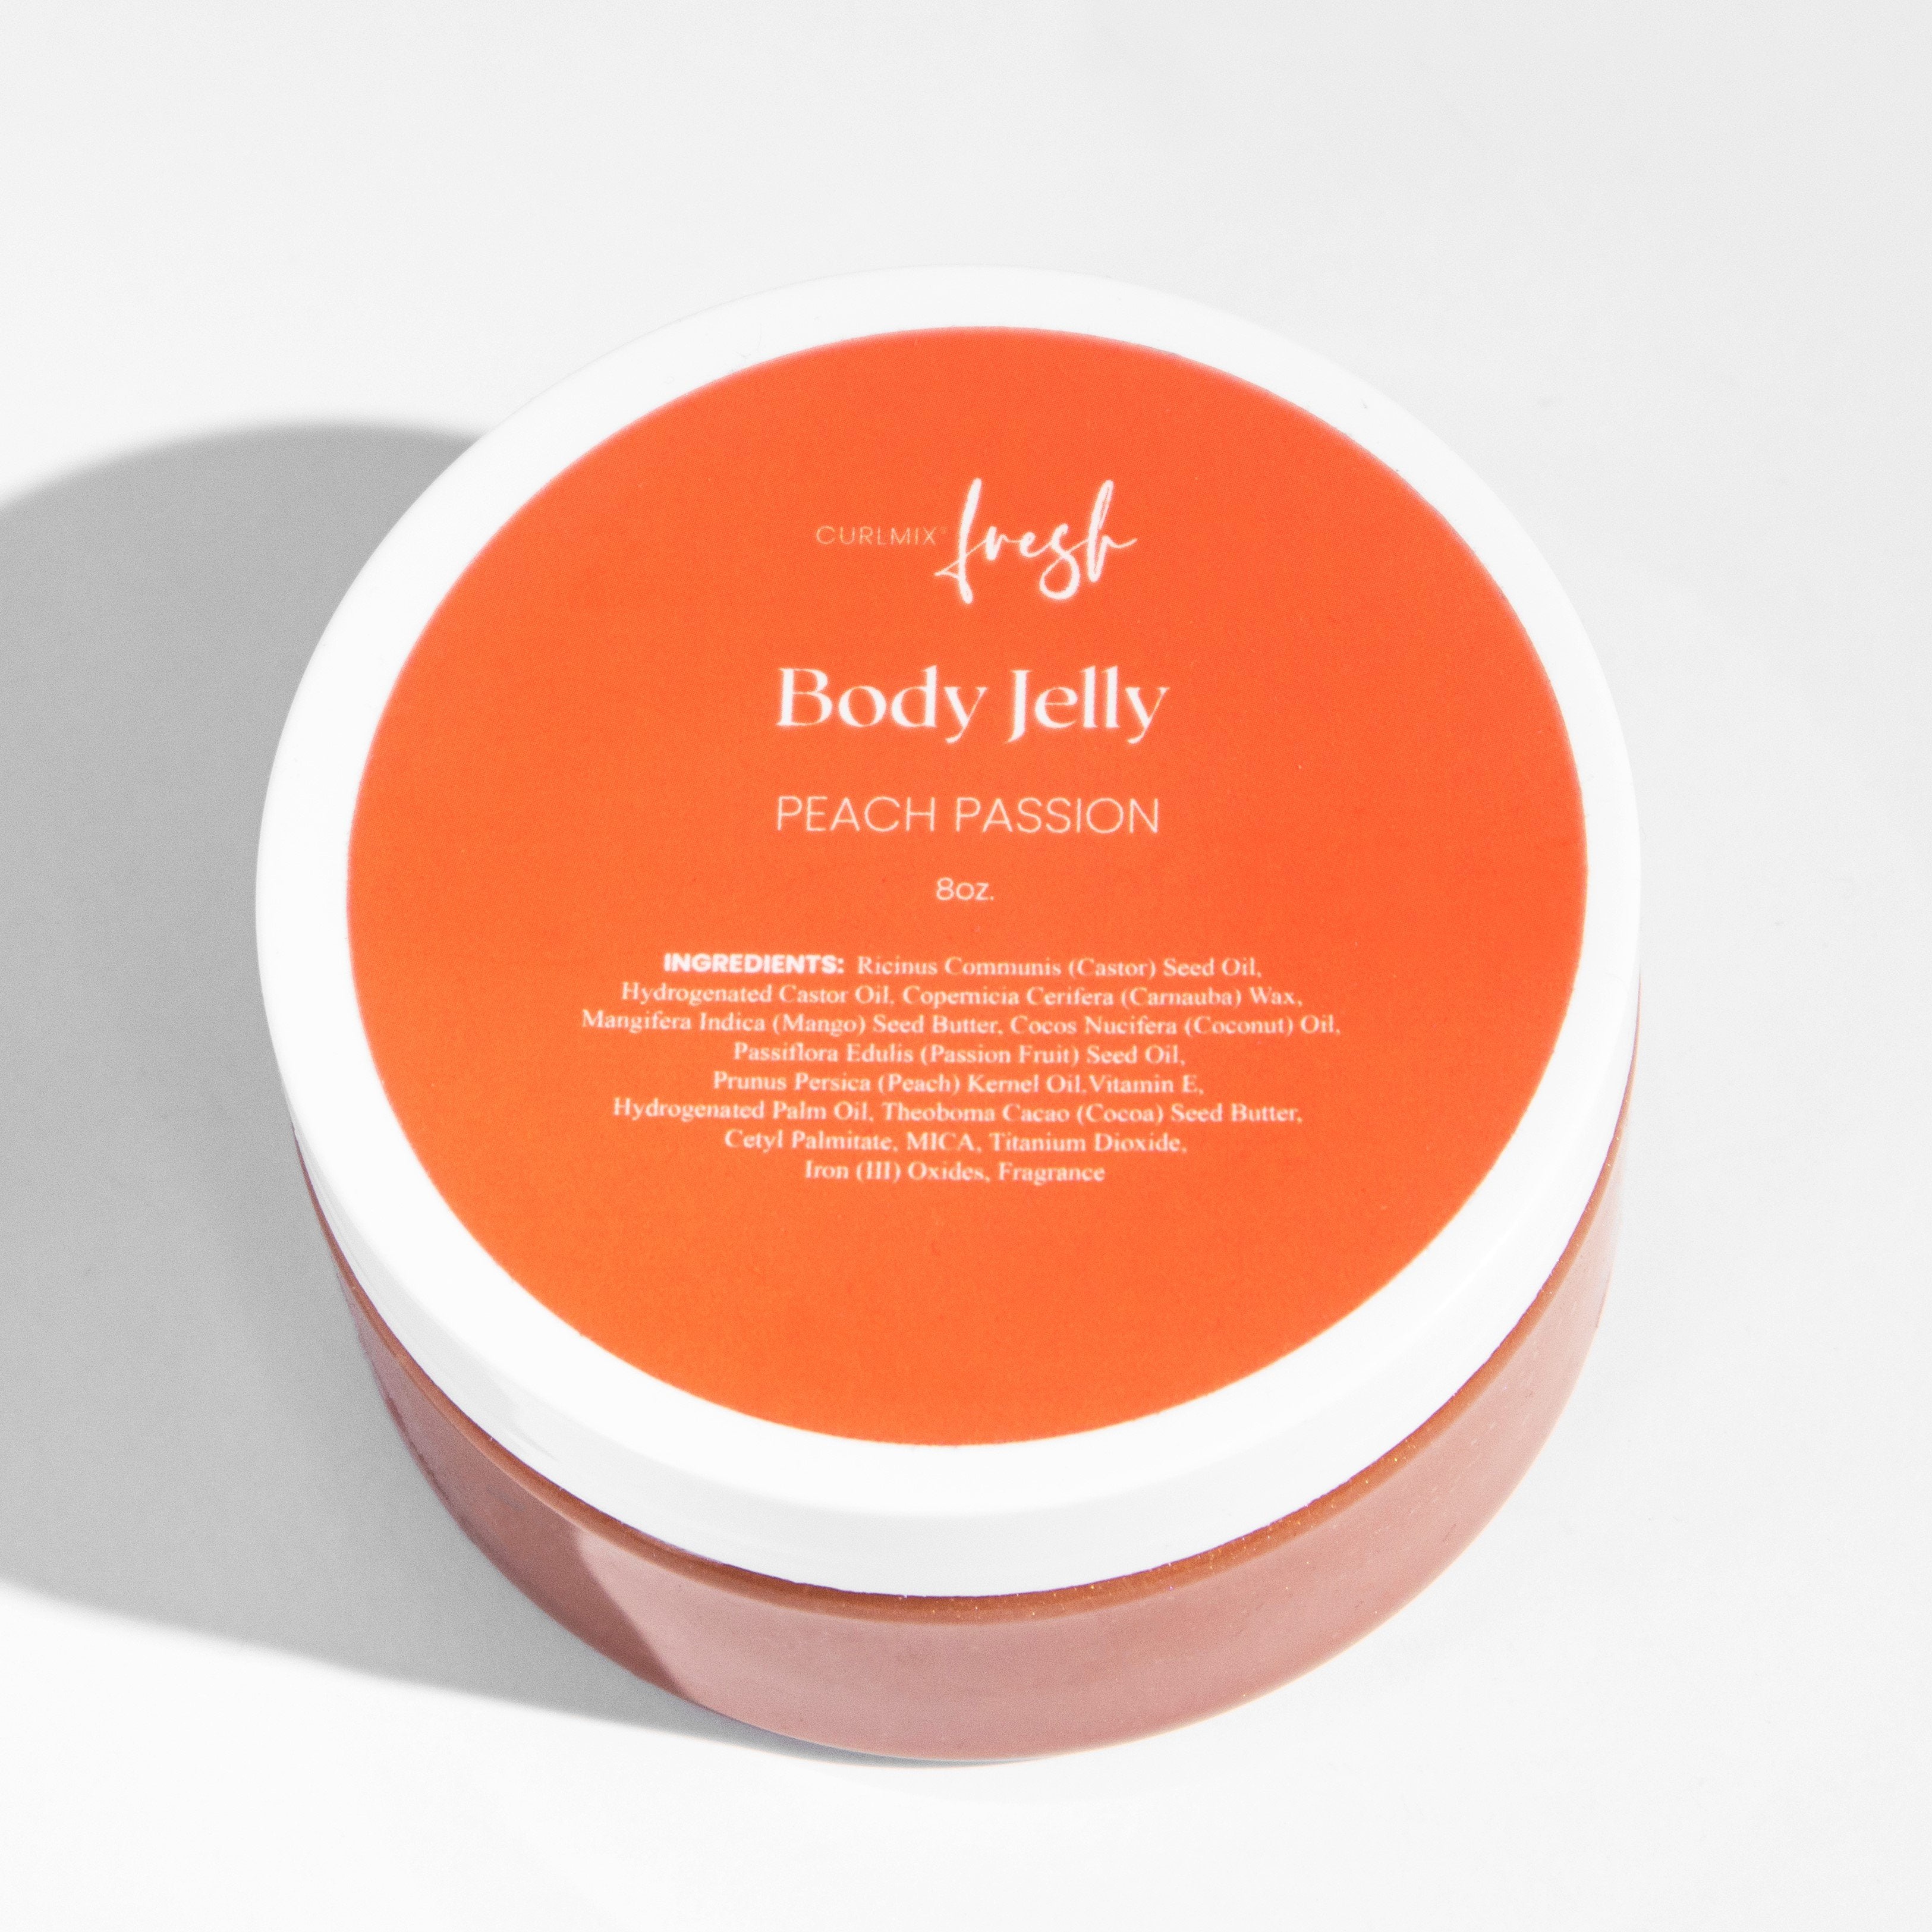 Peach Passion Body Jelly CurlMix Fresh